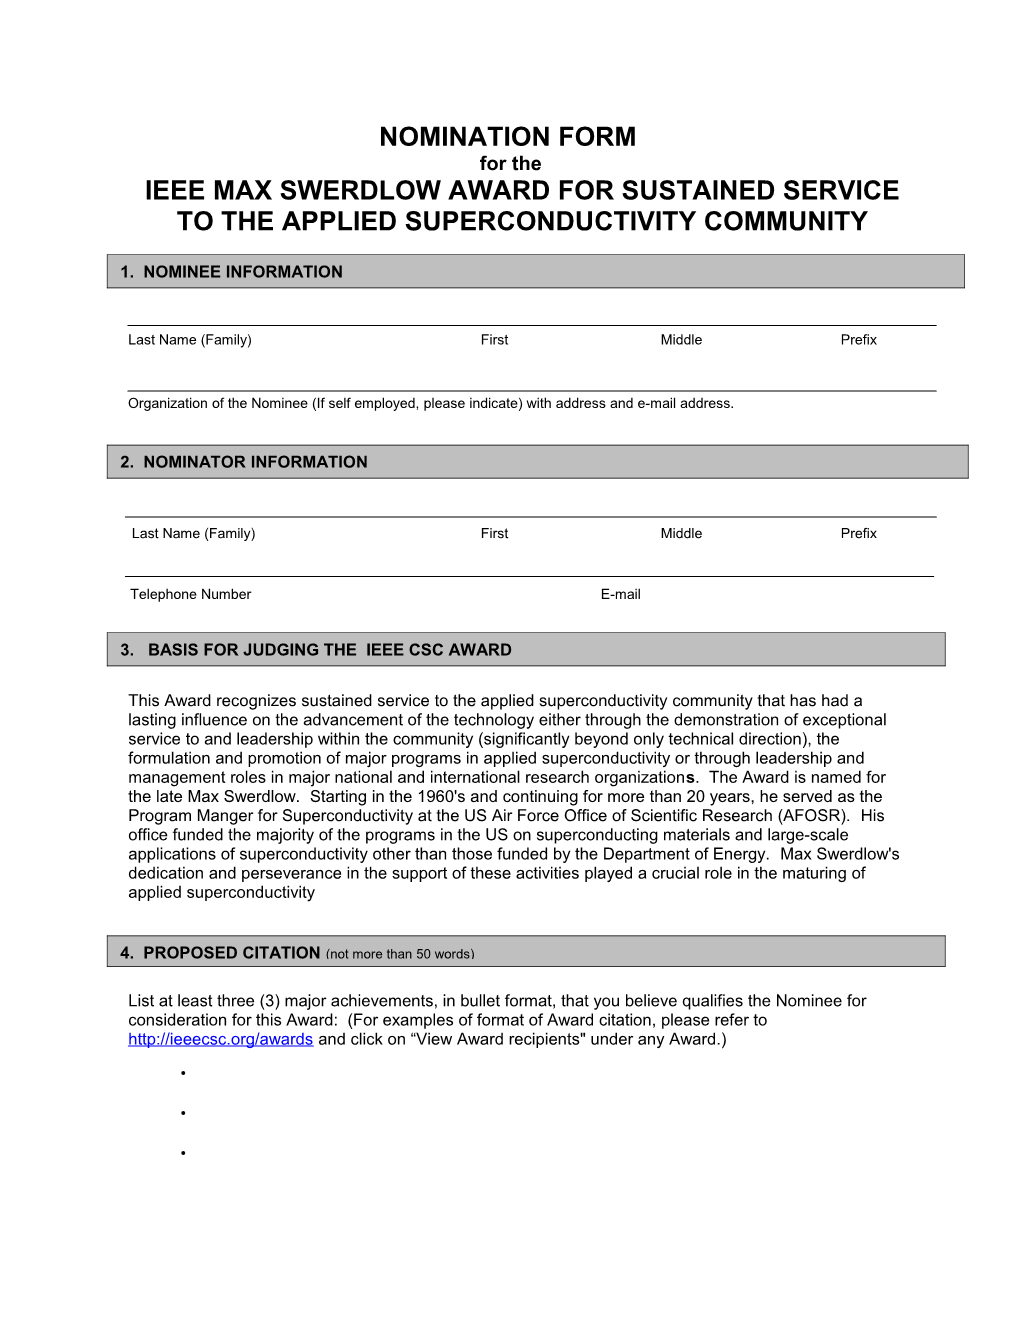 Ieee Max Swerdlow Award for Sustained Service to the Applied Superconductivity Community